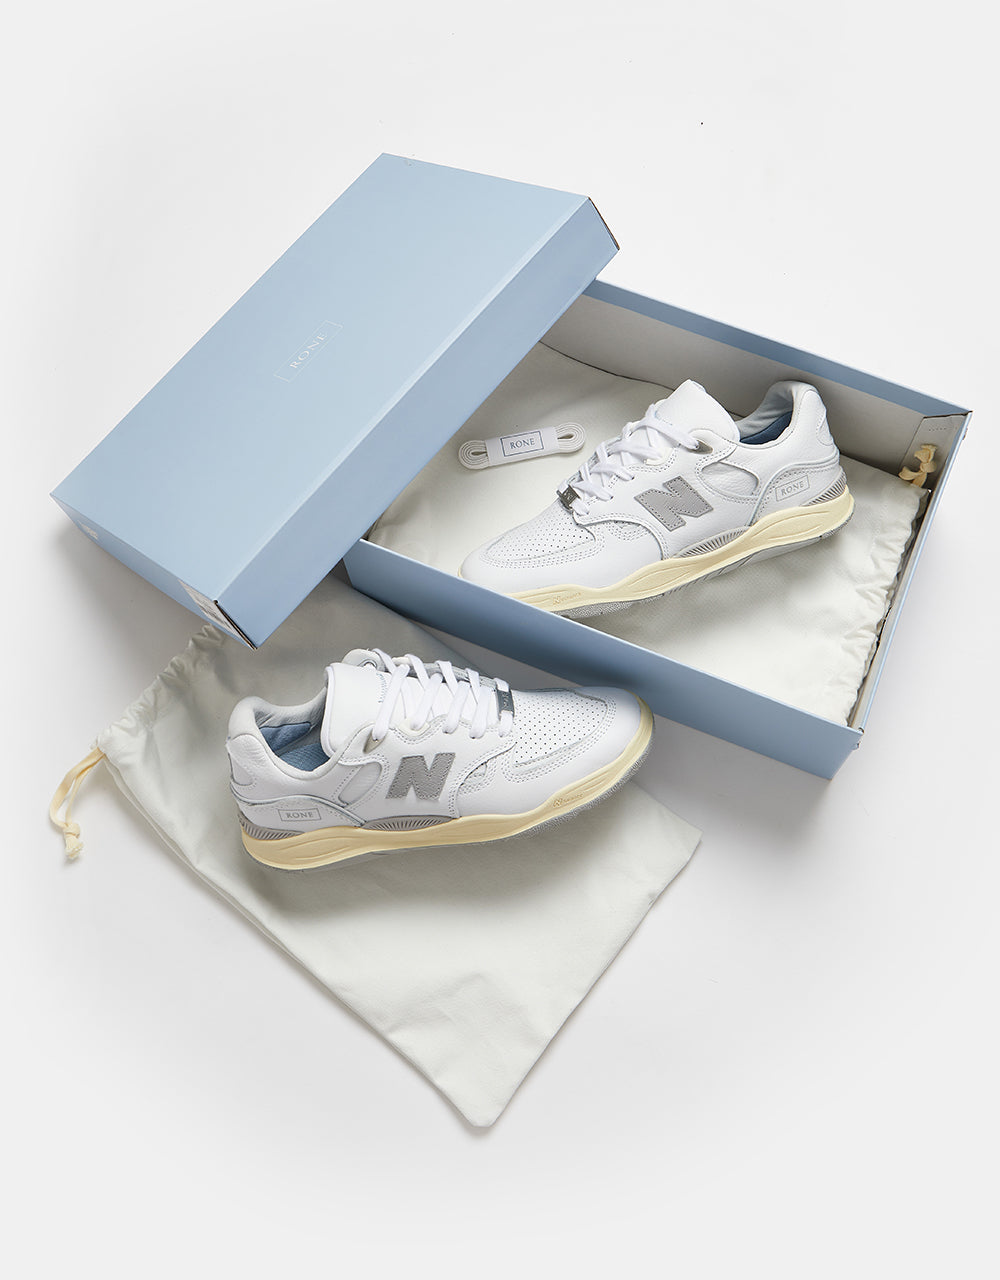 New Balance Numeric x Rone 1010 Skate Shoes - White